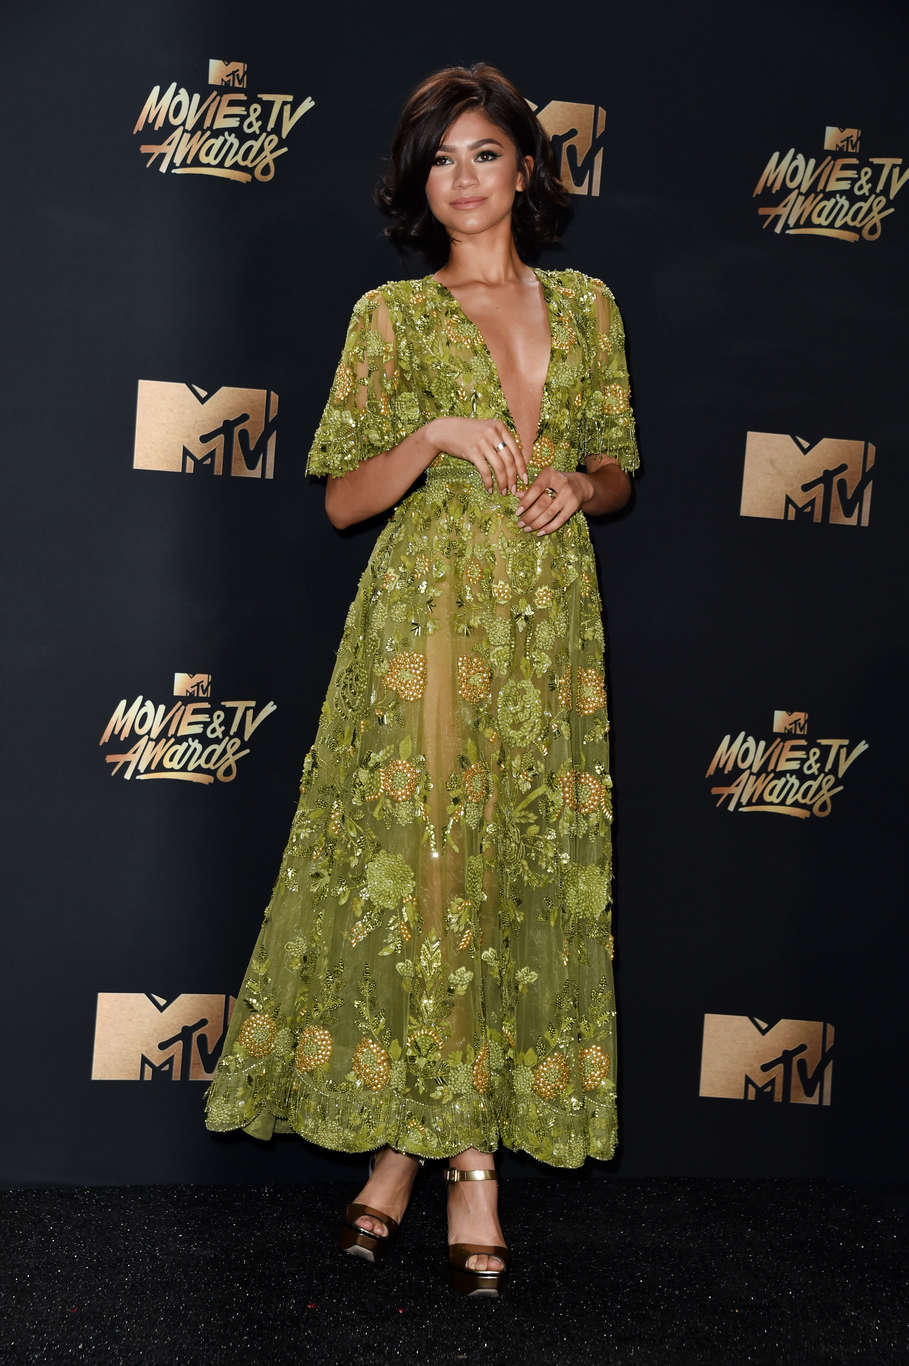 LOS ANGELES, CA - MAY 07: Zendaya attends the 2017 MTV Movie And TV Awards at The Shrine Auditorium on May 7, 2017 in Los Angeles, California. (Photo by Alberto E. Rodriguez/Getty Images)